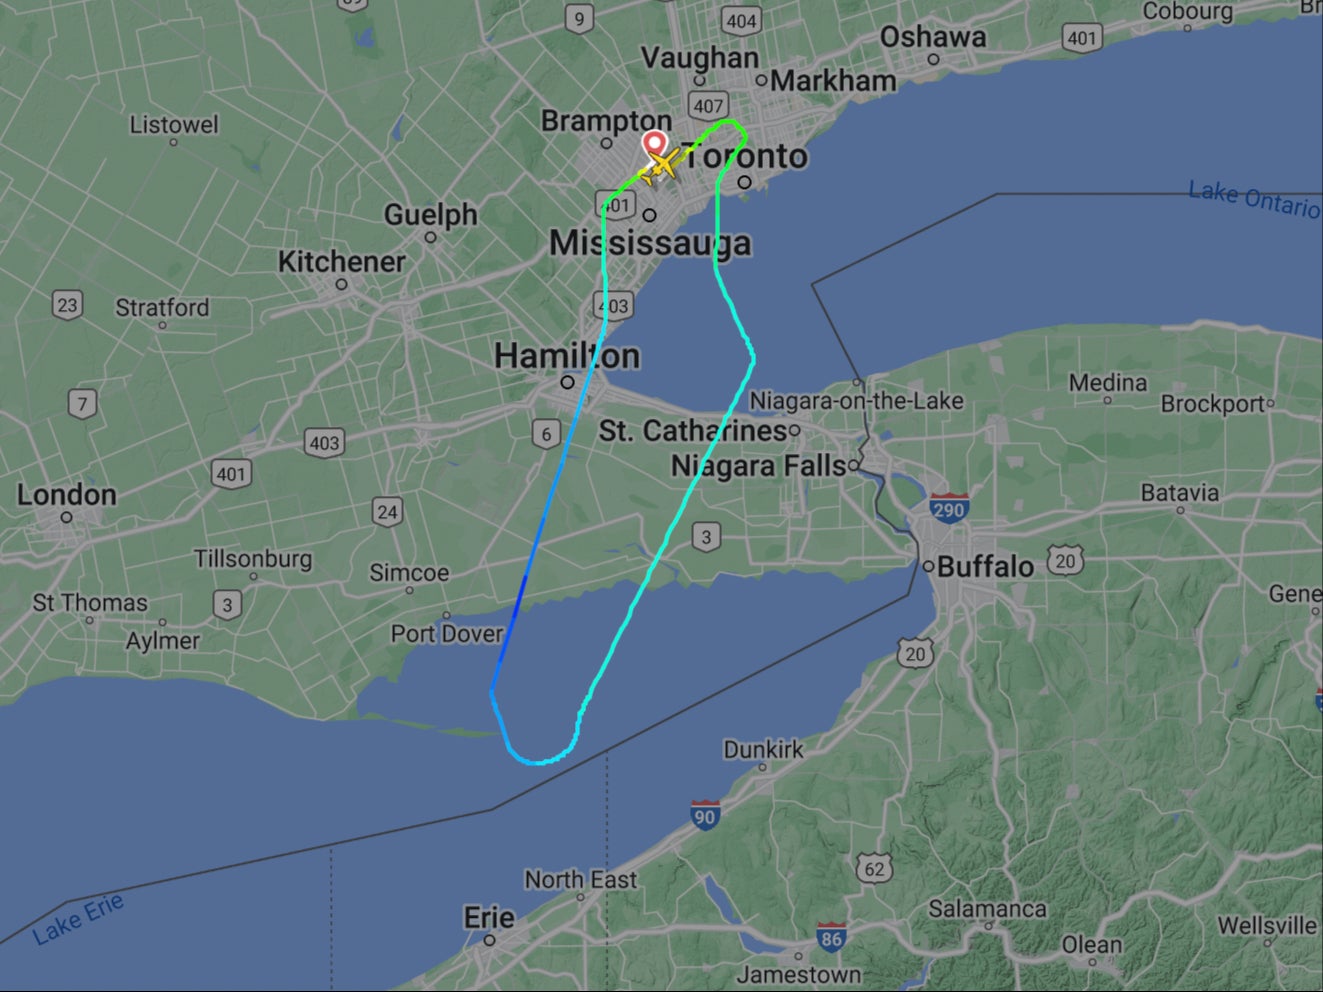 The aircraft almost crossed the Canada-US border before having to turn back to Toronto